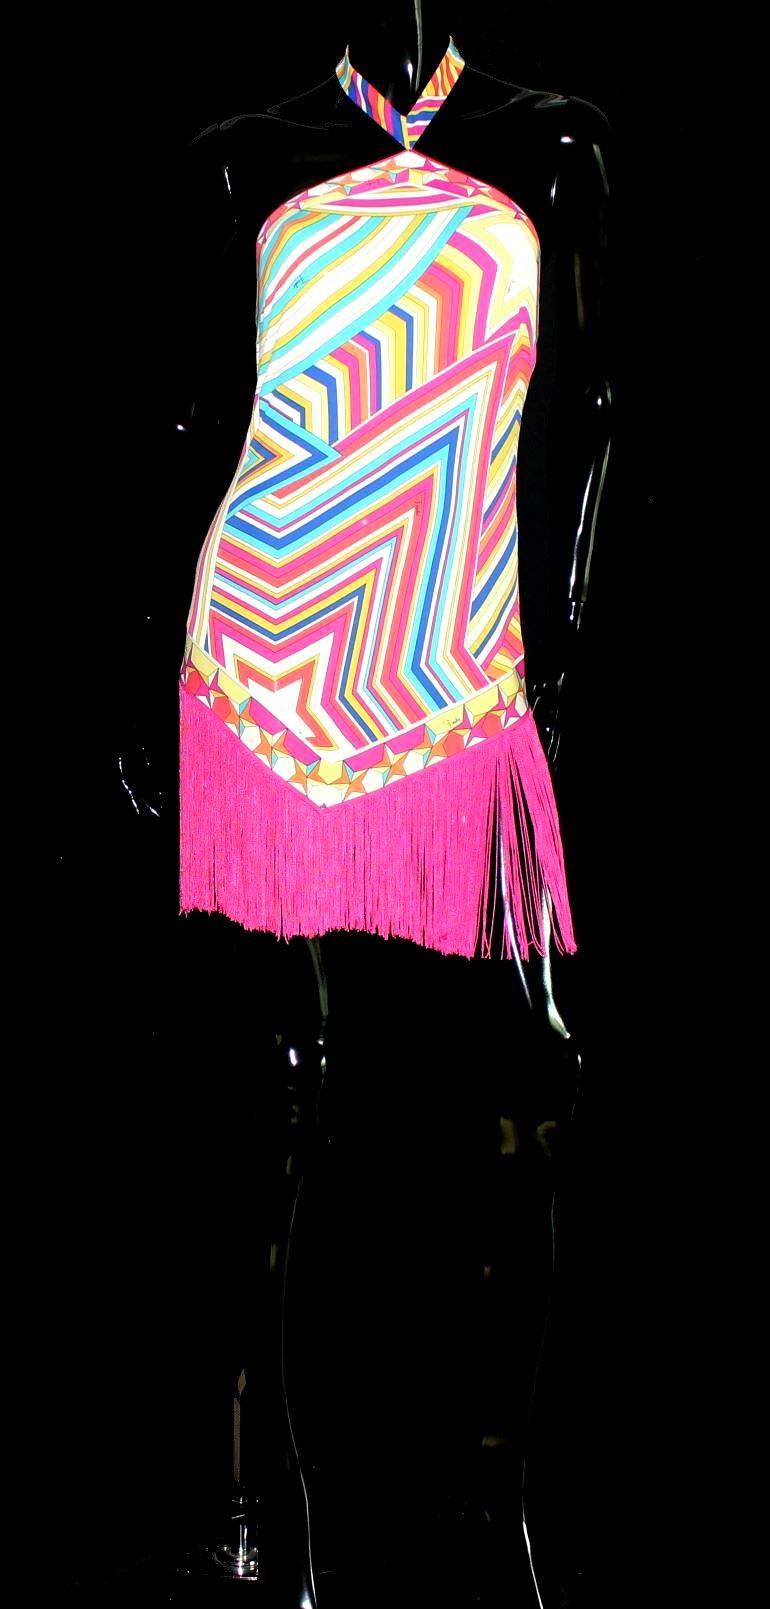 Beautiful EMILIO PUCCI print silk dress
Signature piece with the timeless EMILIO PUCCI print
Stunning print, "Emilio" discreetly written all over
Hot pink fringes on lower part
Simply slips on
Hidden zip closure on back side
Neck